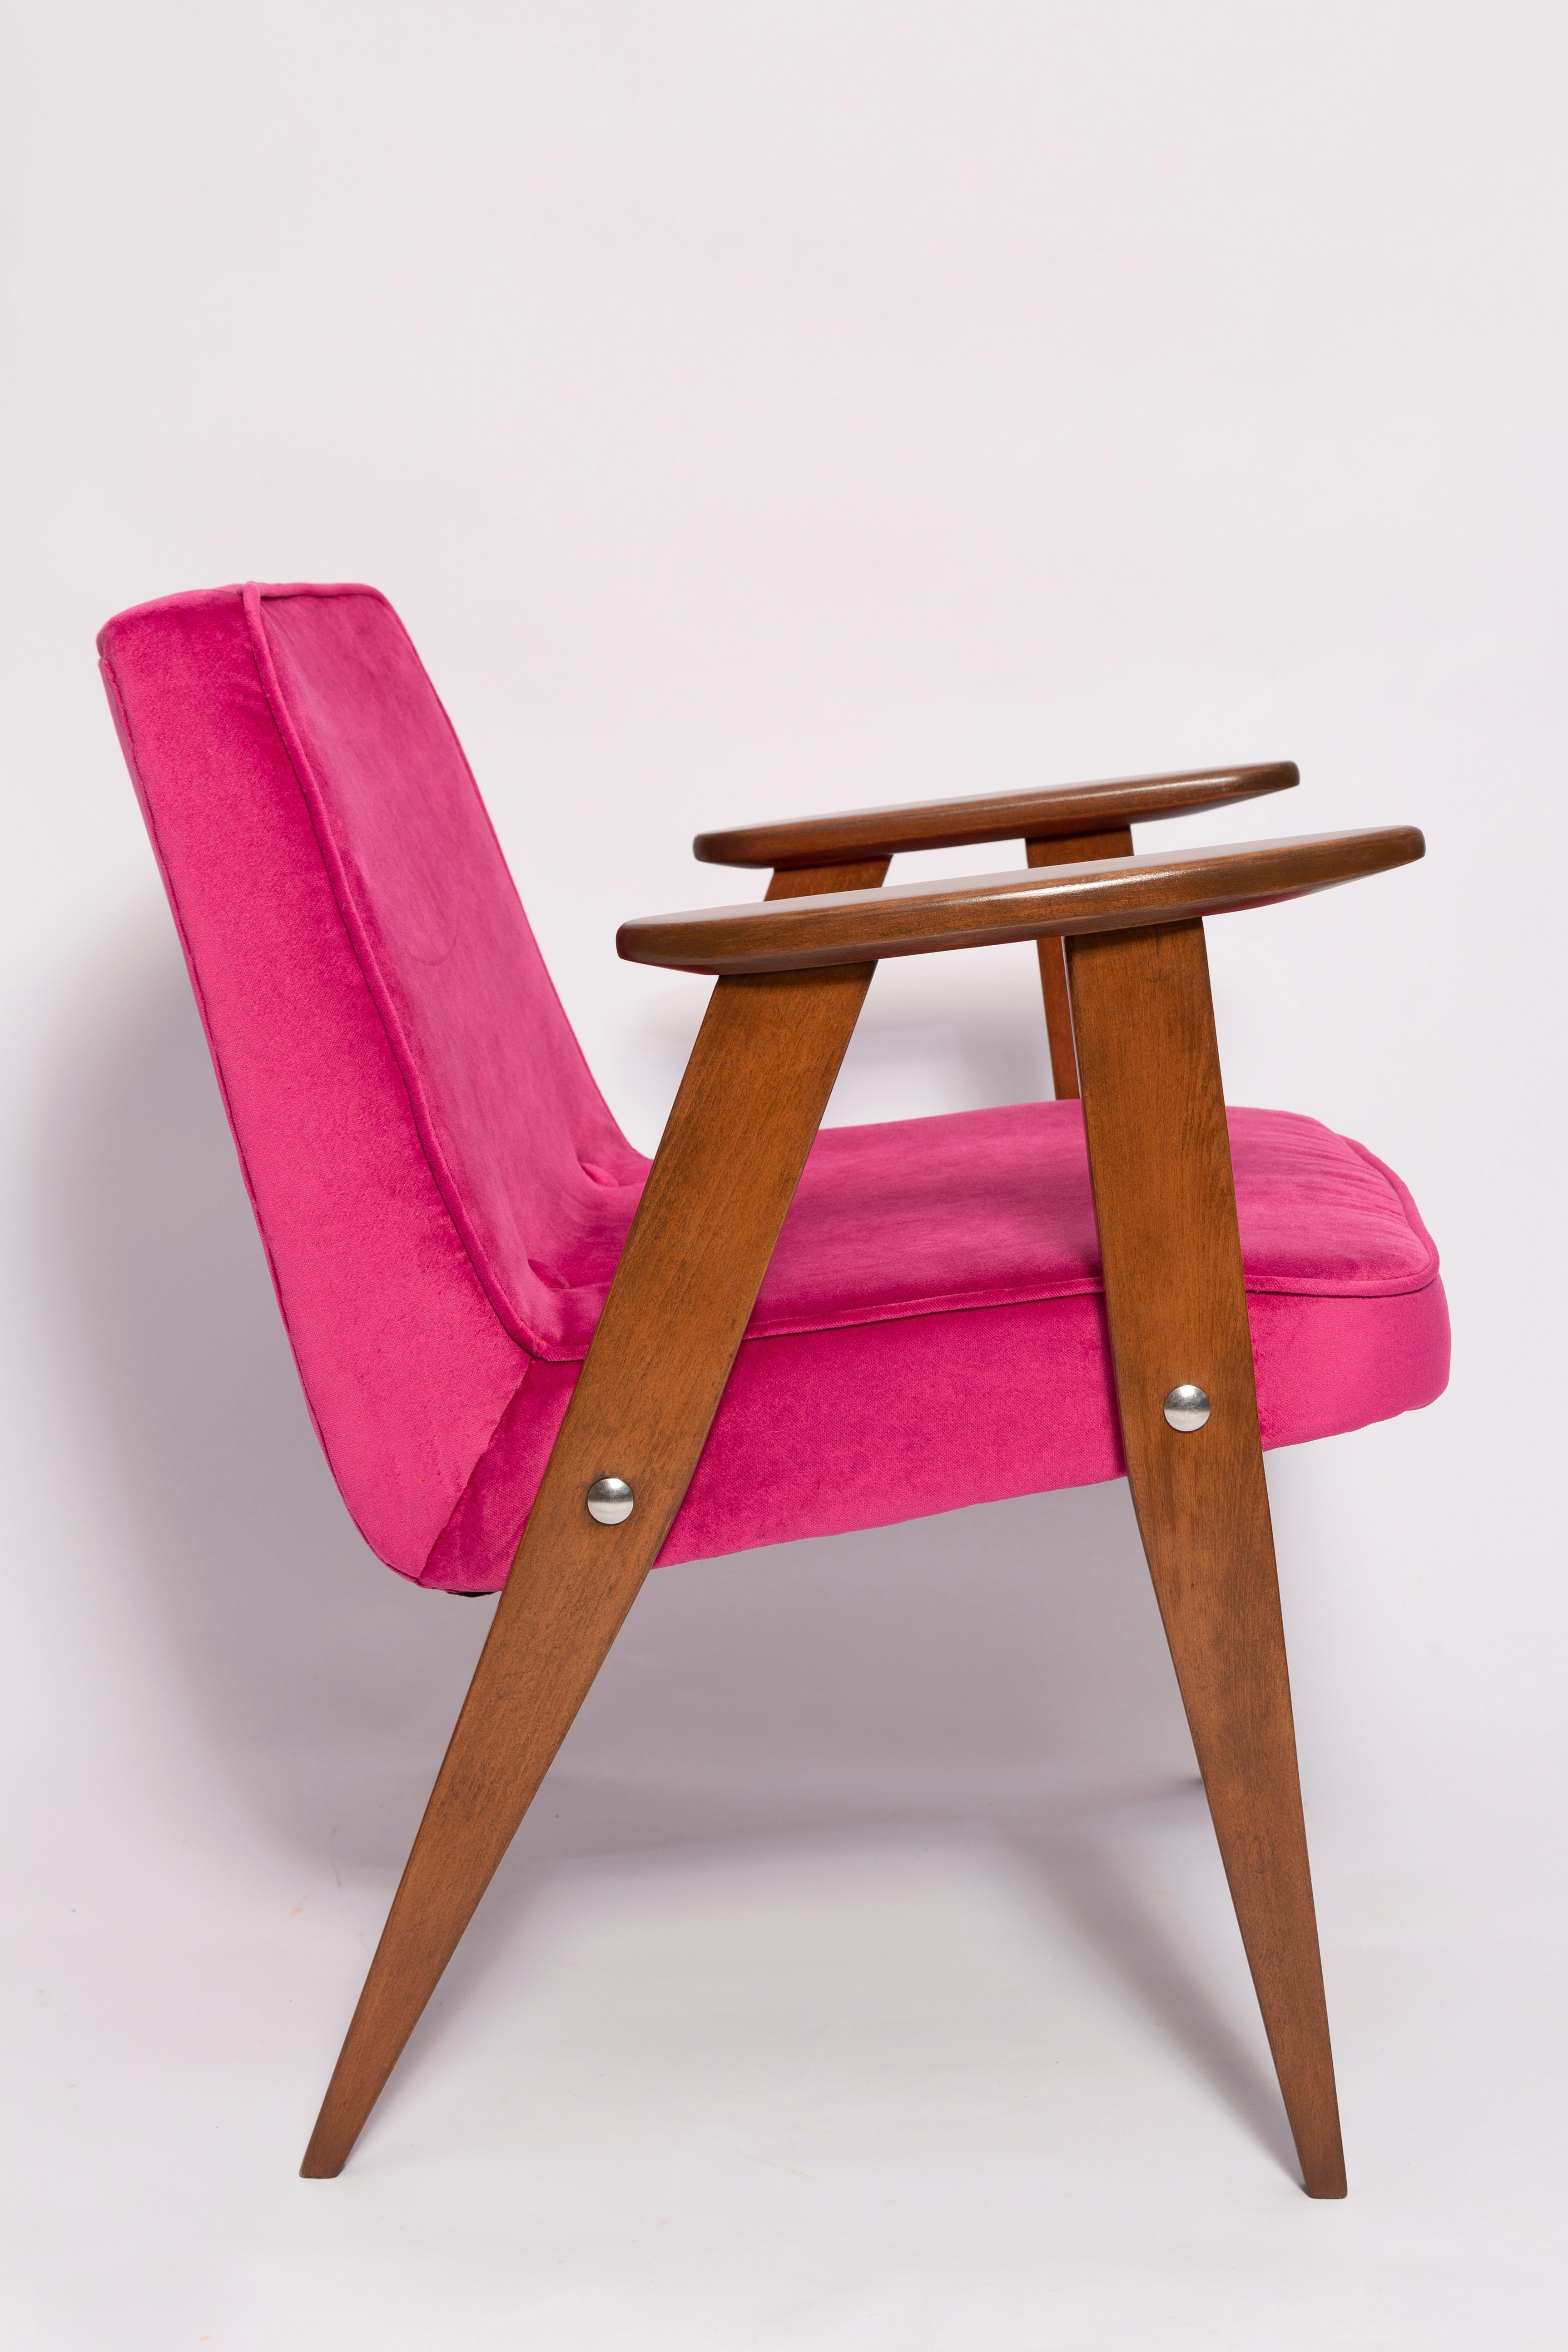 Pair of Mid-Century 366 Armchairs, Pink and Blue, by Chierowski Europe, 1960s For Sale 4